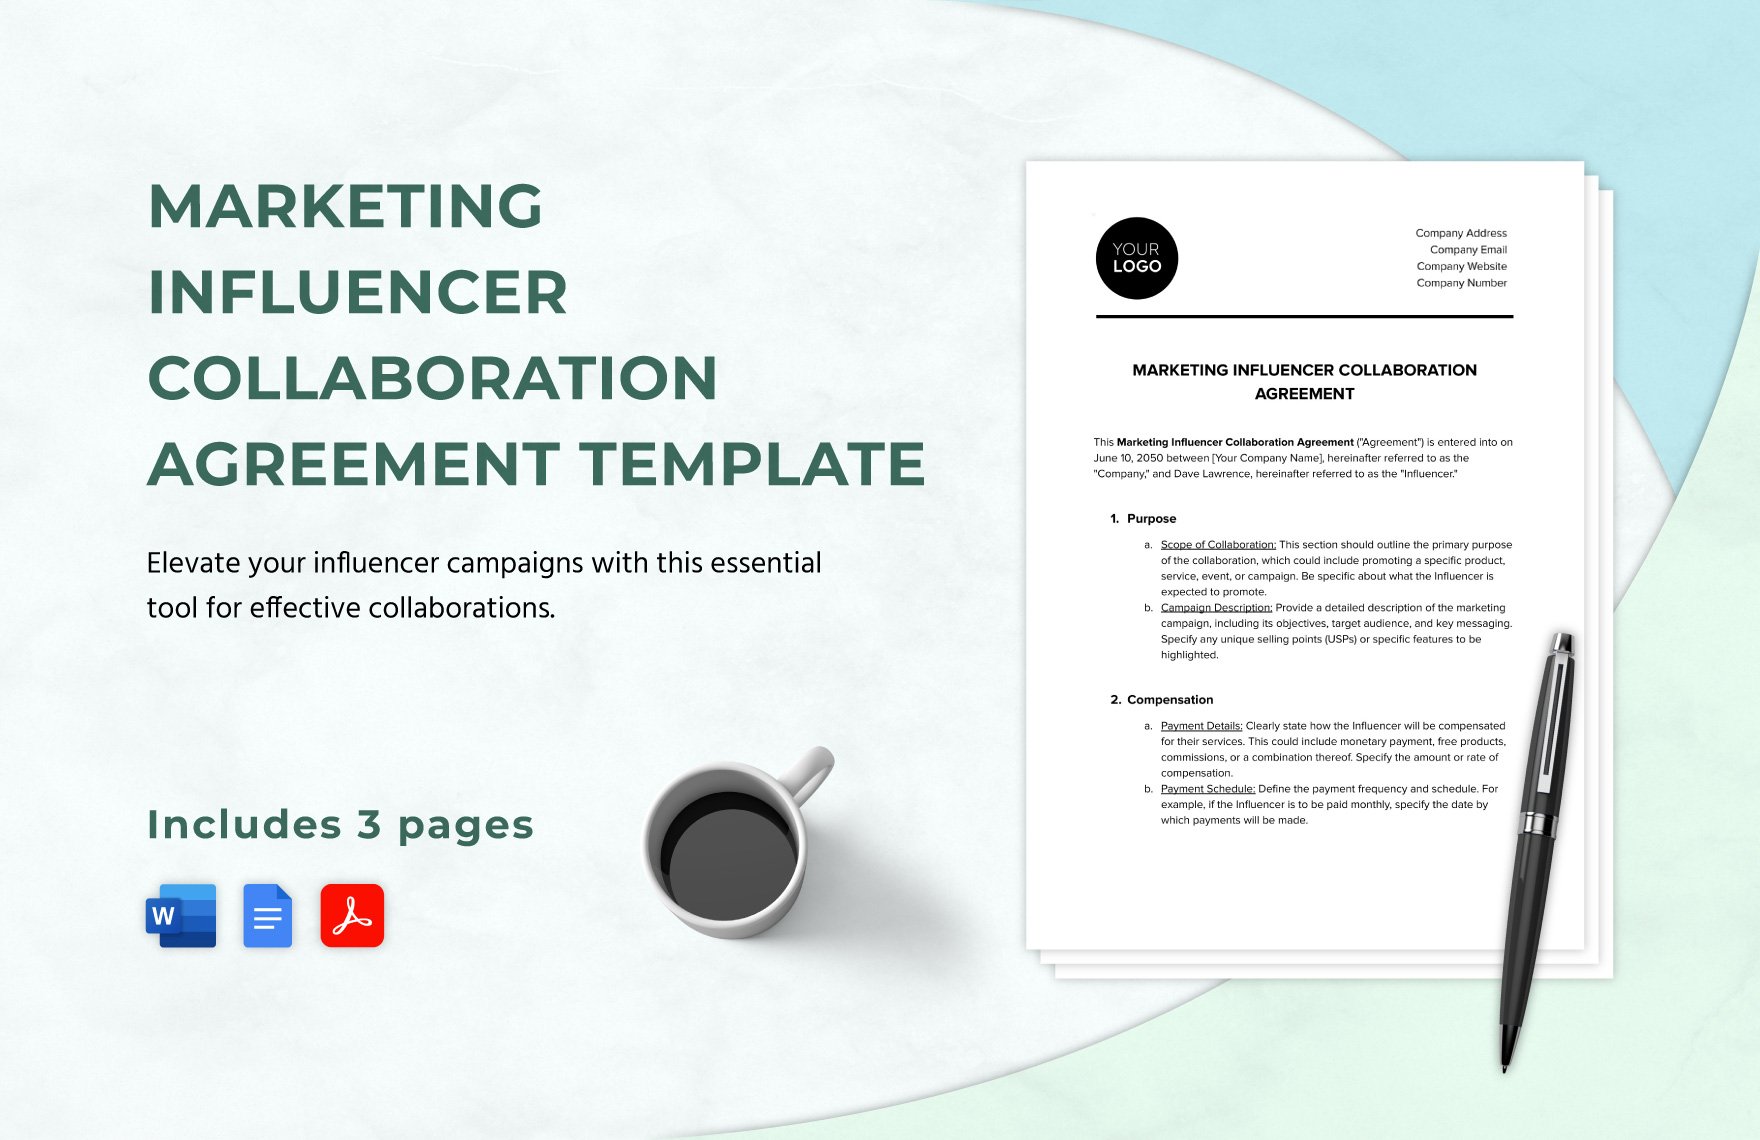 Marketing Influencer Collaboration Agreement Template in Word, Google Docs, PDF